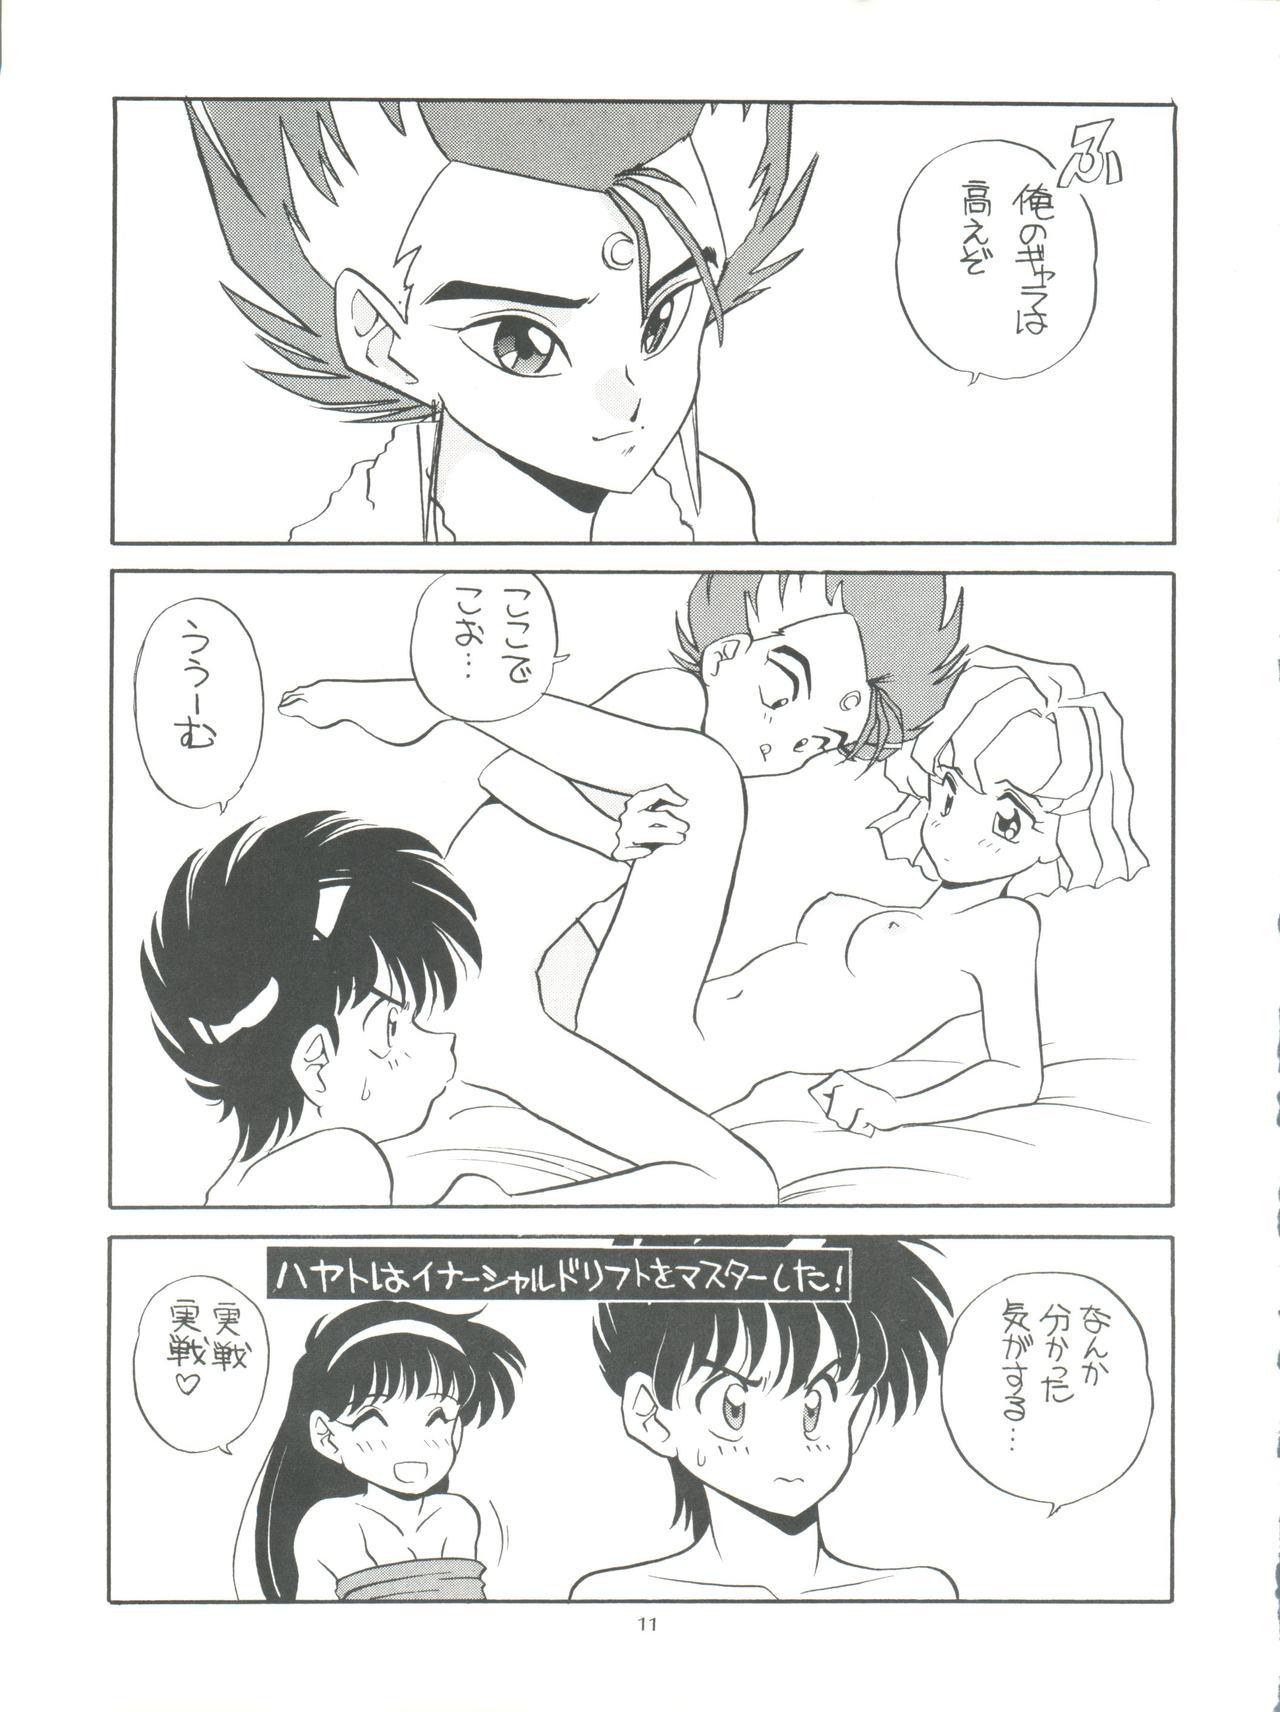 Missionary Amamori 3 - Brave express might gaine Future gpx cyber formula All purpose cultural cat girl nuku nuku Girlfriend - Page 11